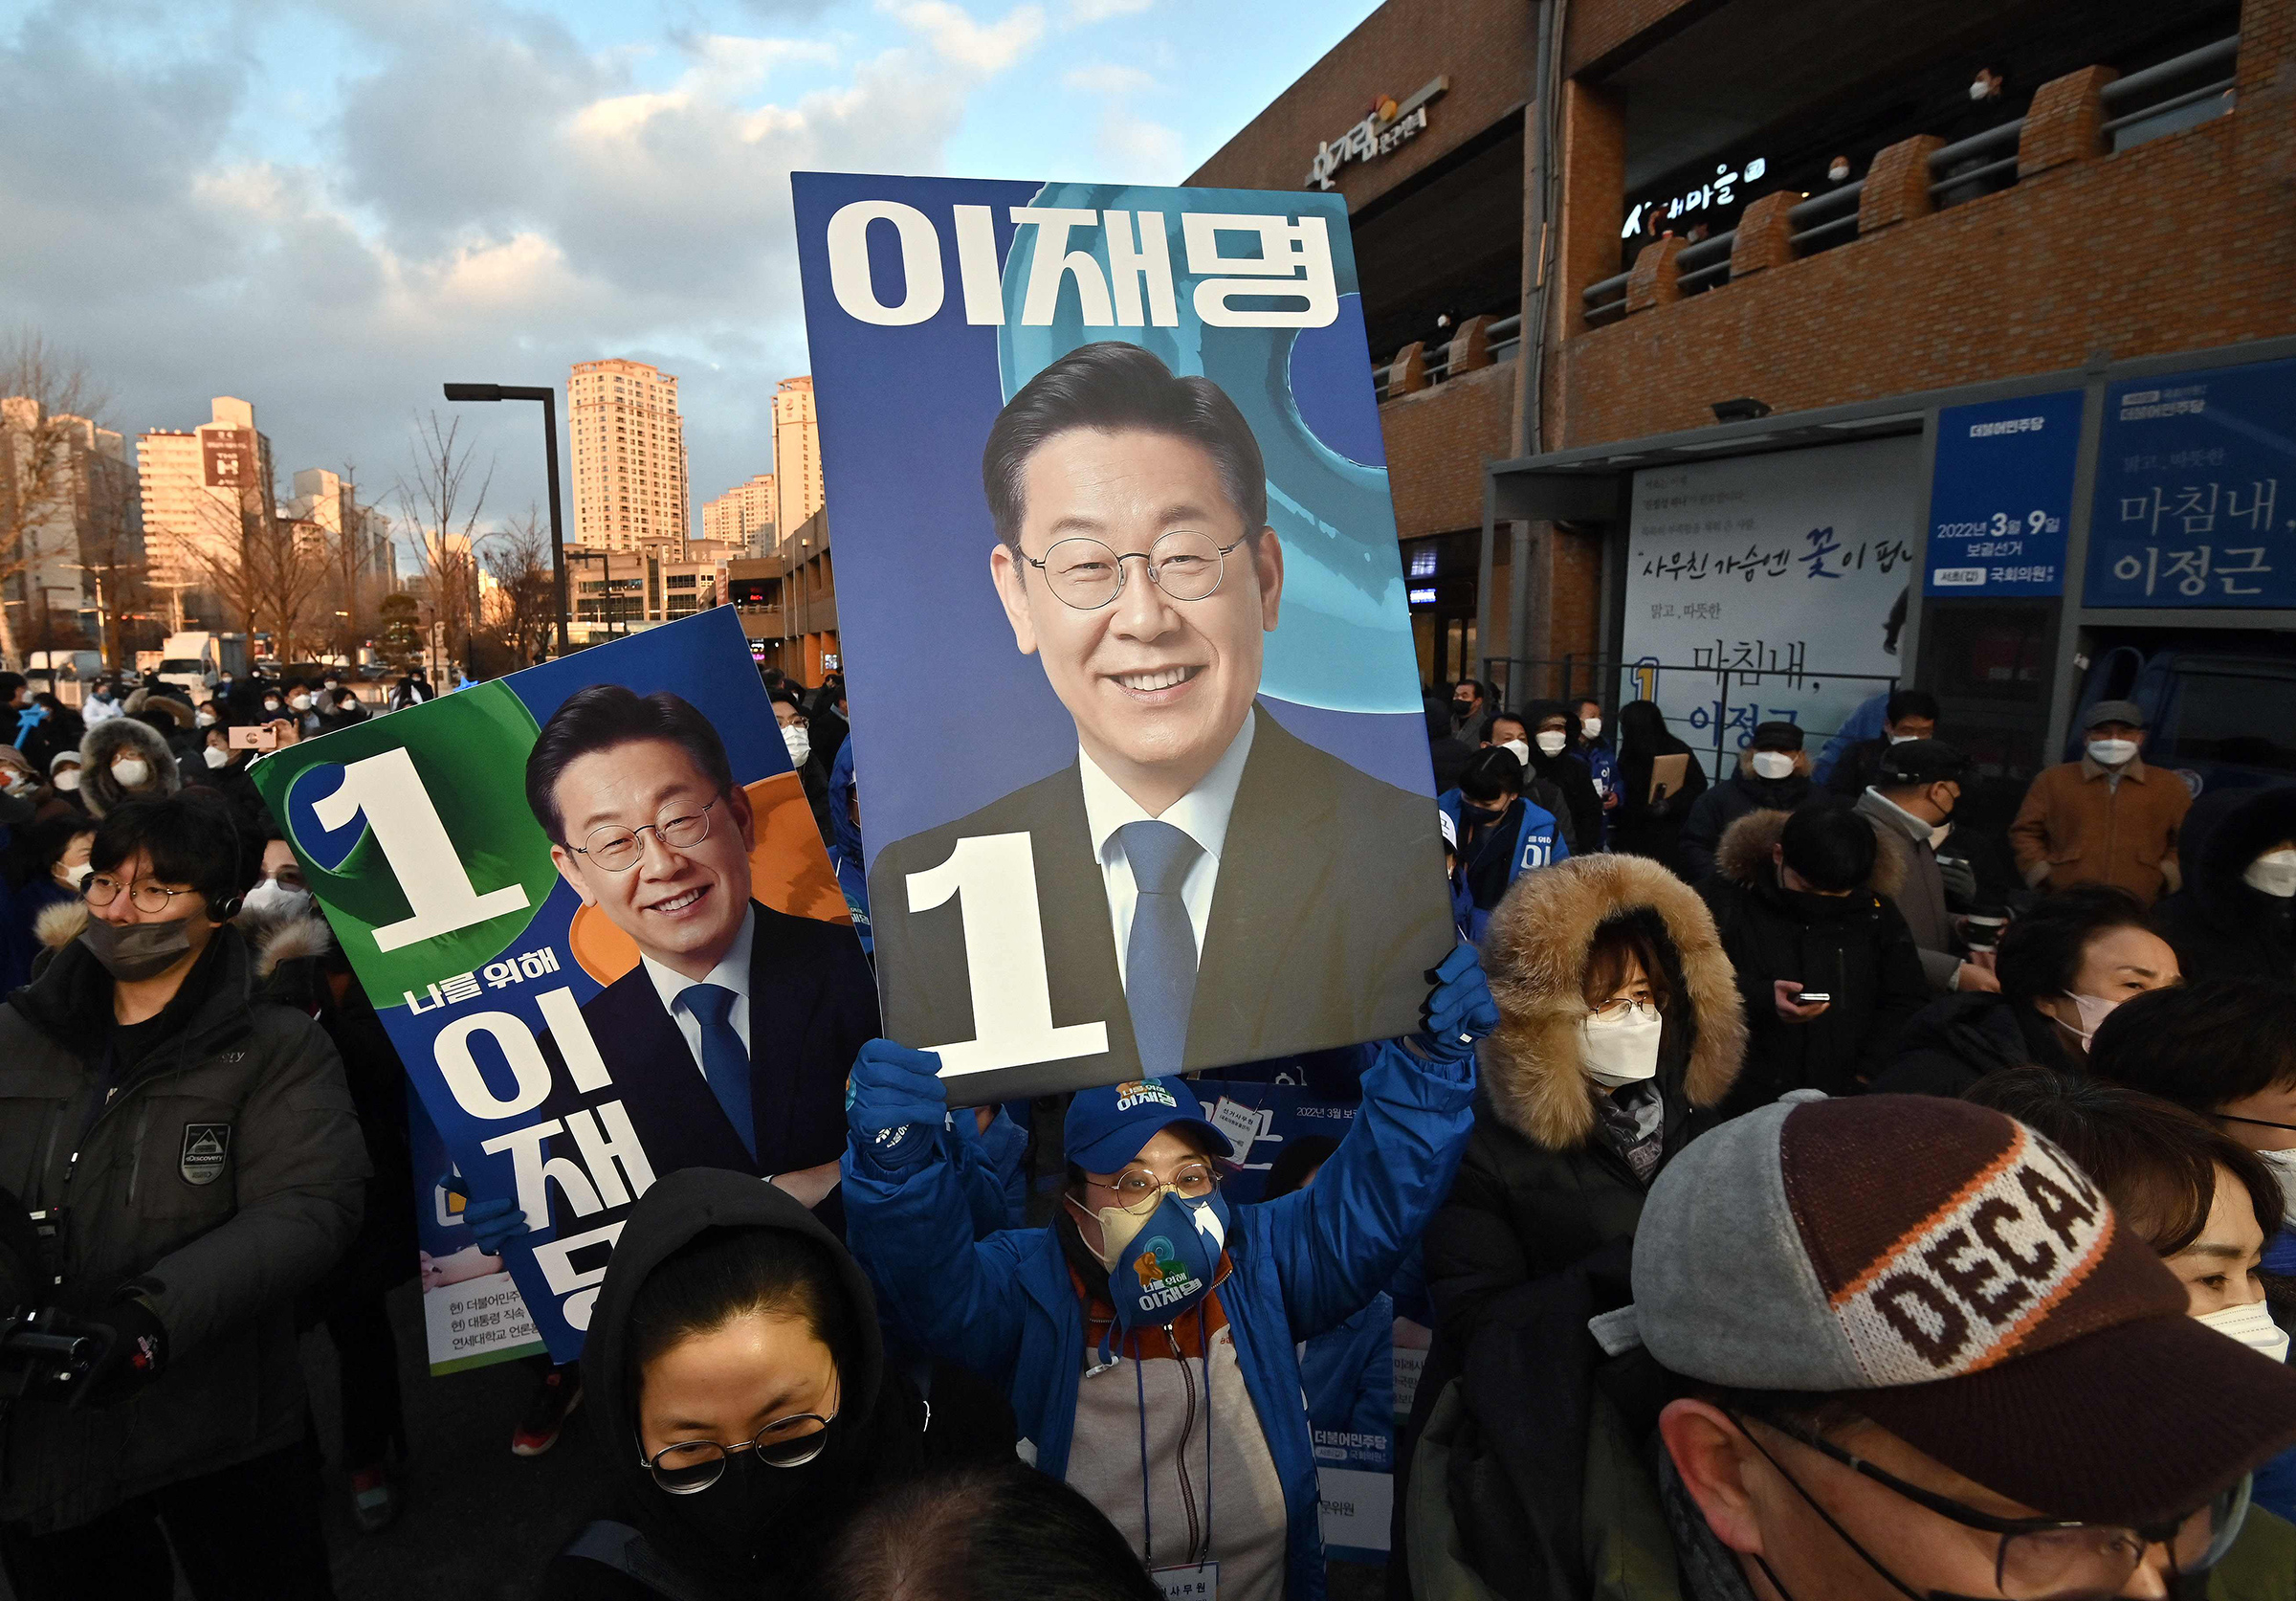 Supporters of Lee Jae-myung hold placards showing pictures of the candidate during an election campaign in Seoul on Feb. 15, as the official presidential campaign period kicked off for a 22-day run ahead of the election on March 9. (Jung Yeon-je—AFP/Getty Images)